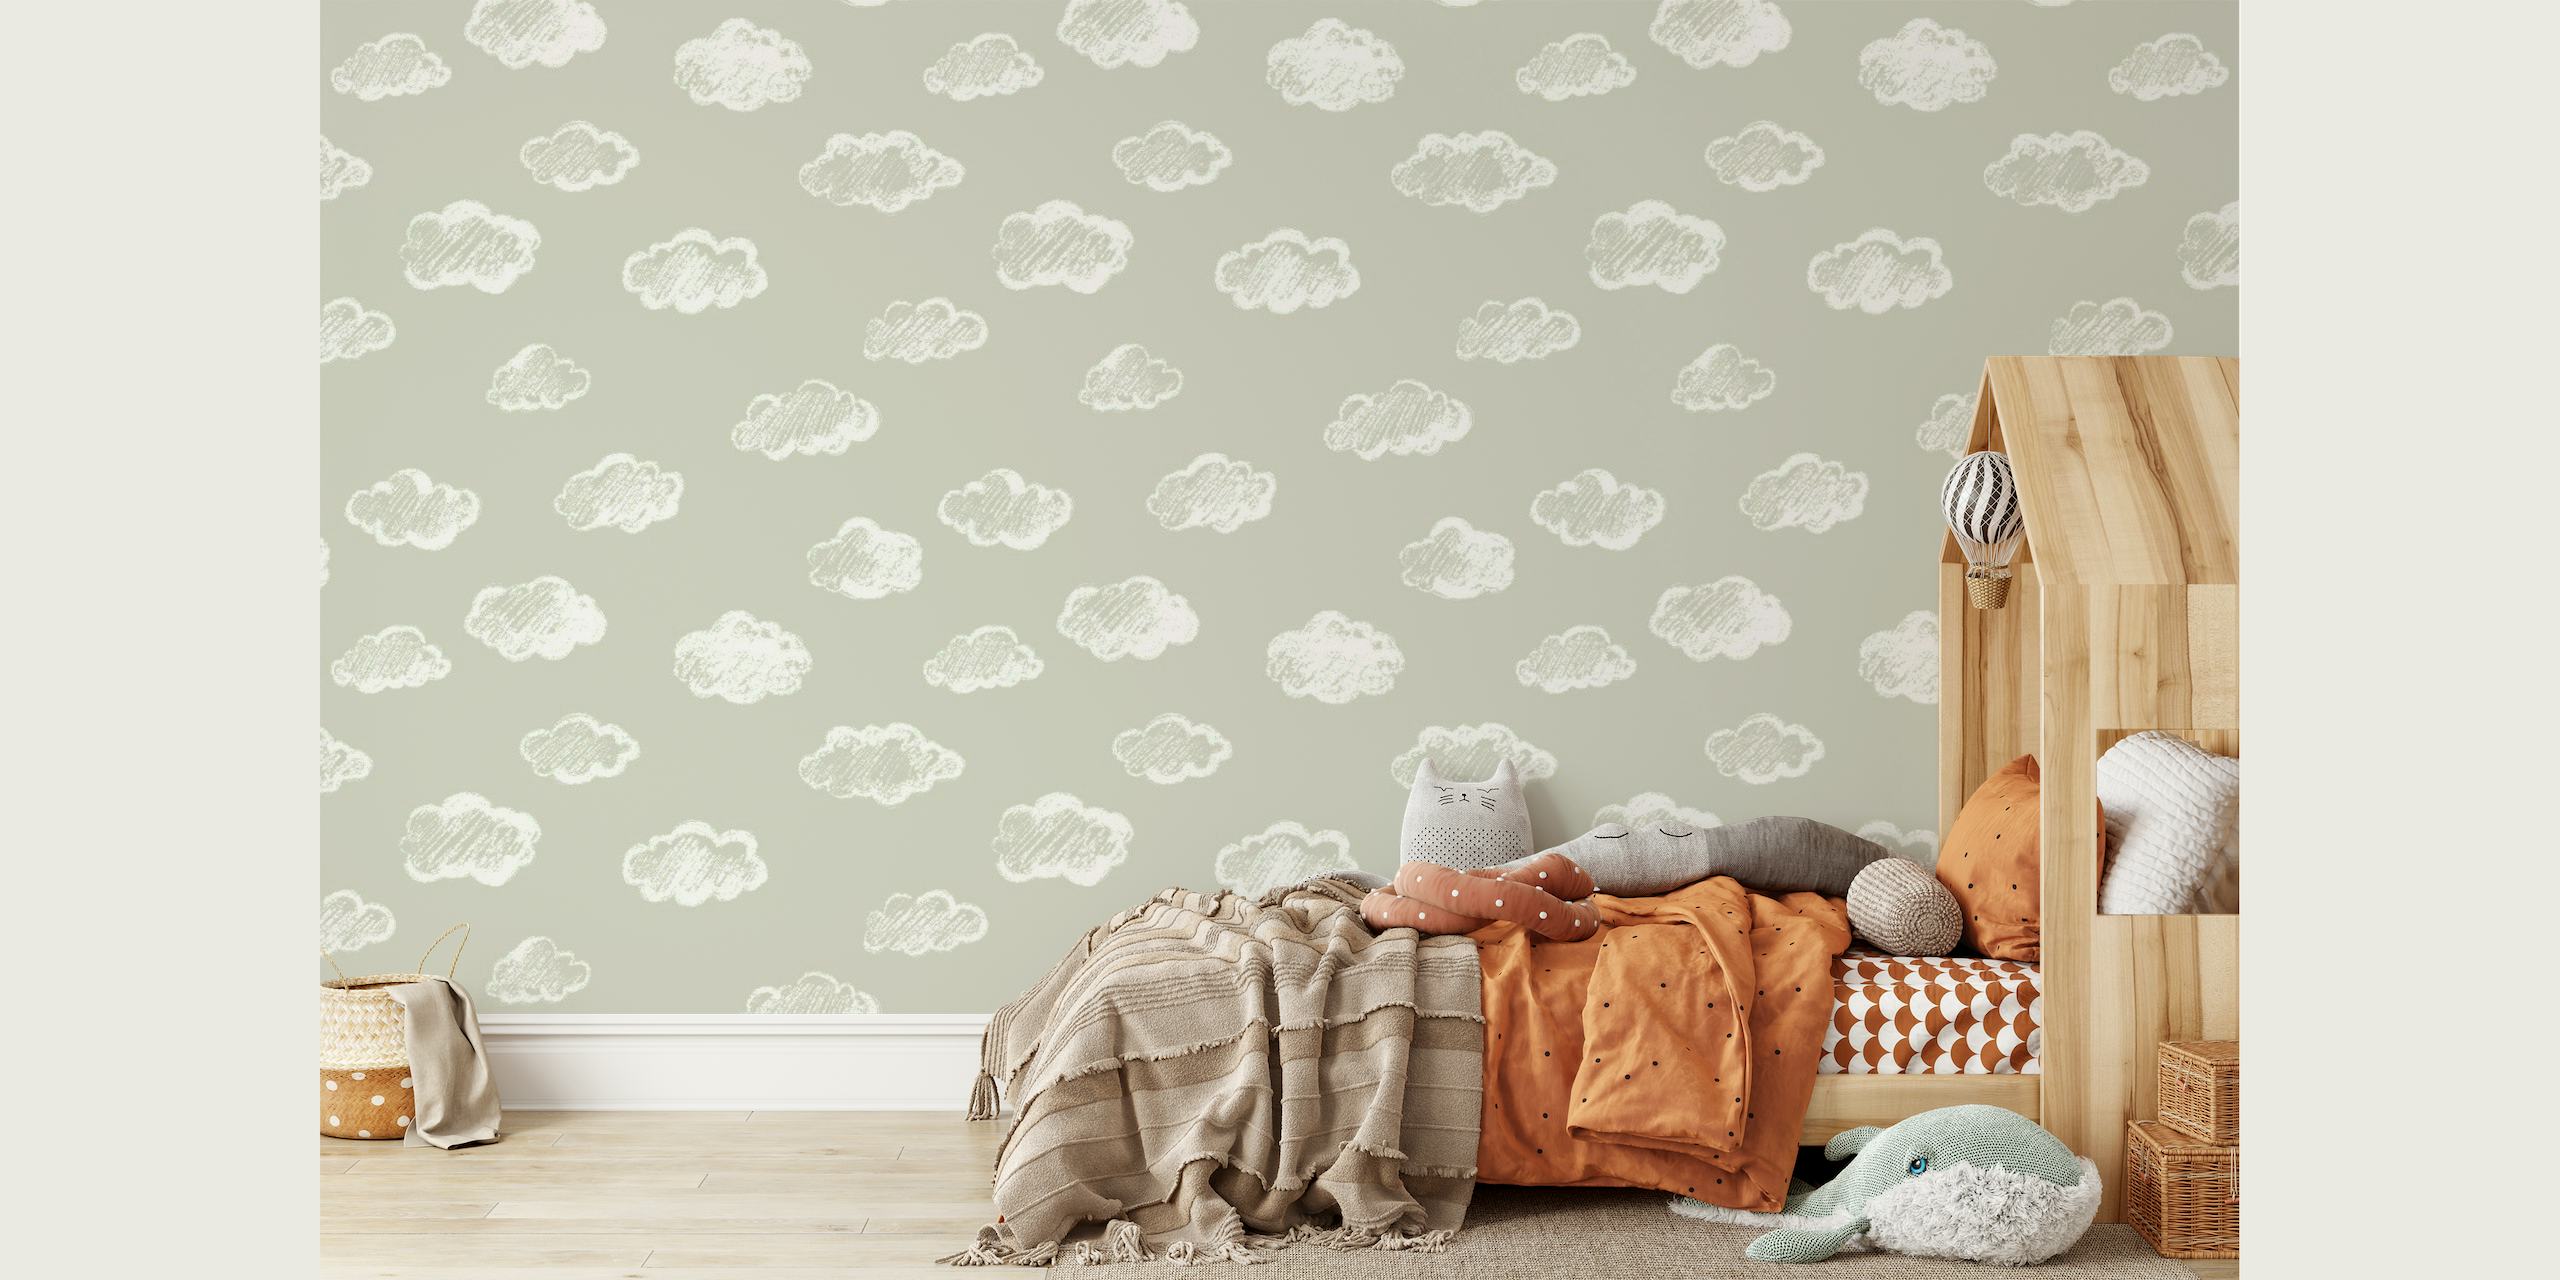 Chalky white cloud shapes on a dove grey background wall mural